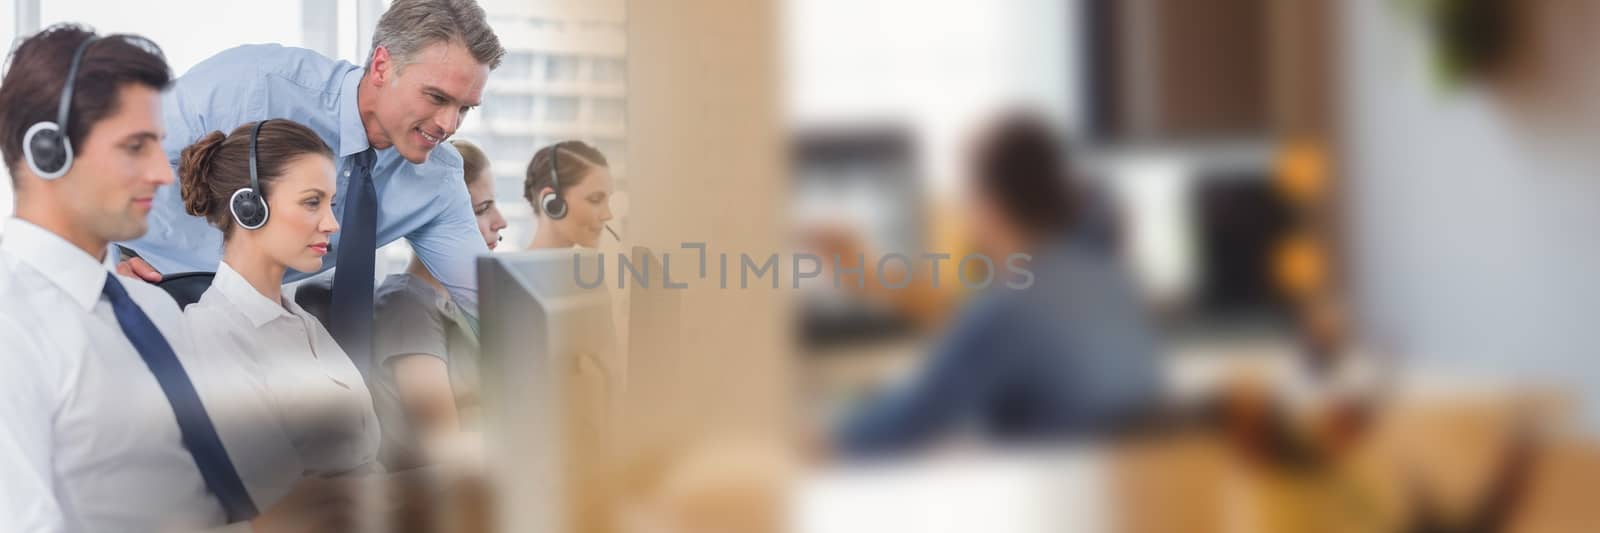 Digital composite of Call centre employees and blurry image of people at computer